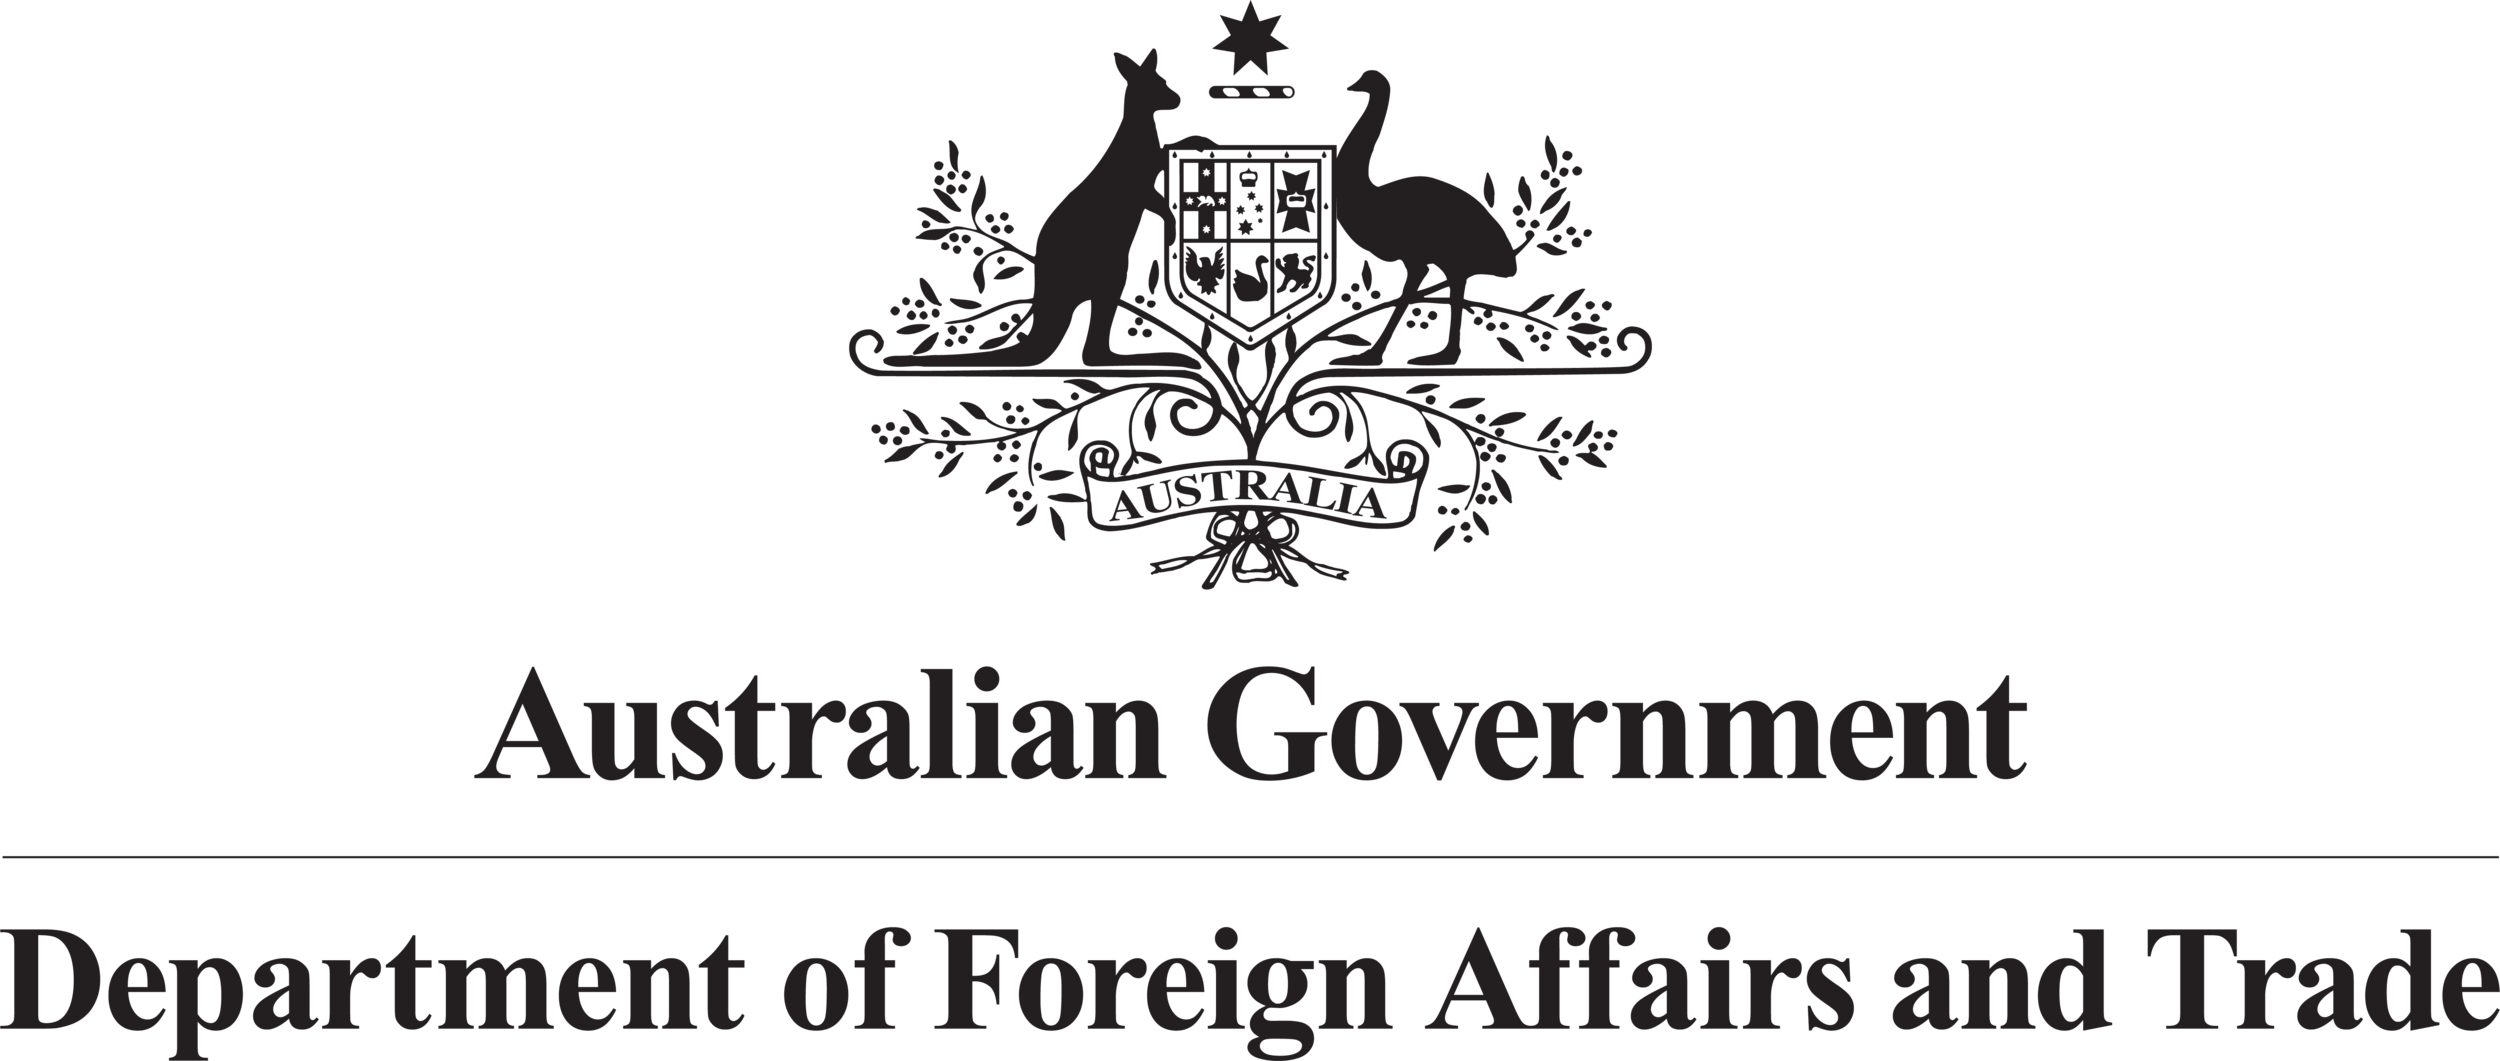 DFAT_Stacked_Black_transparent.png